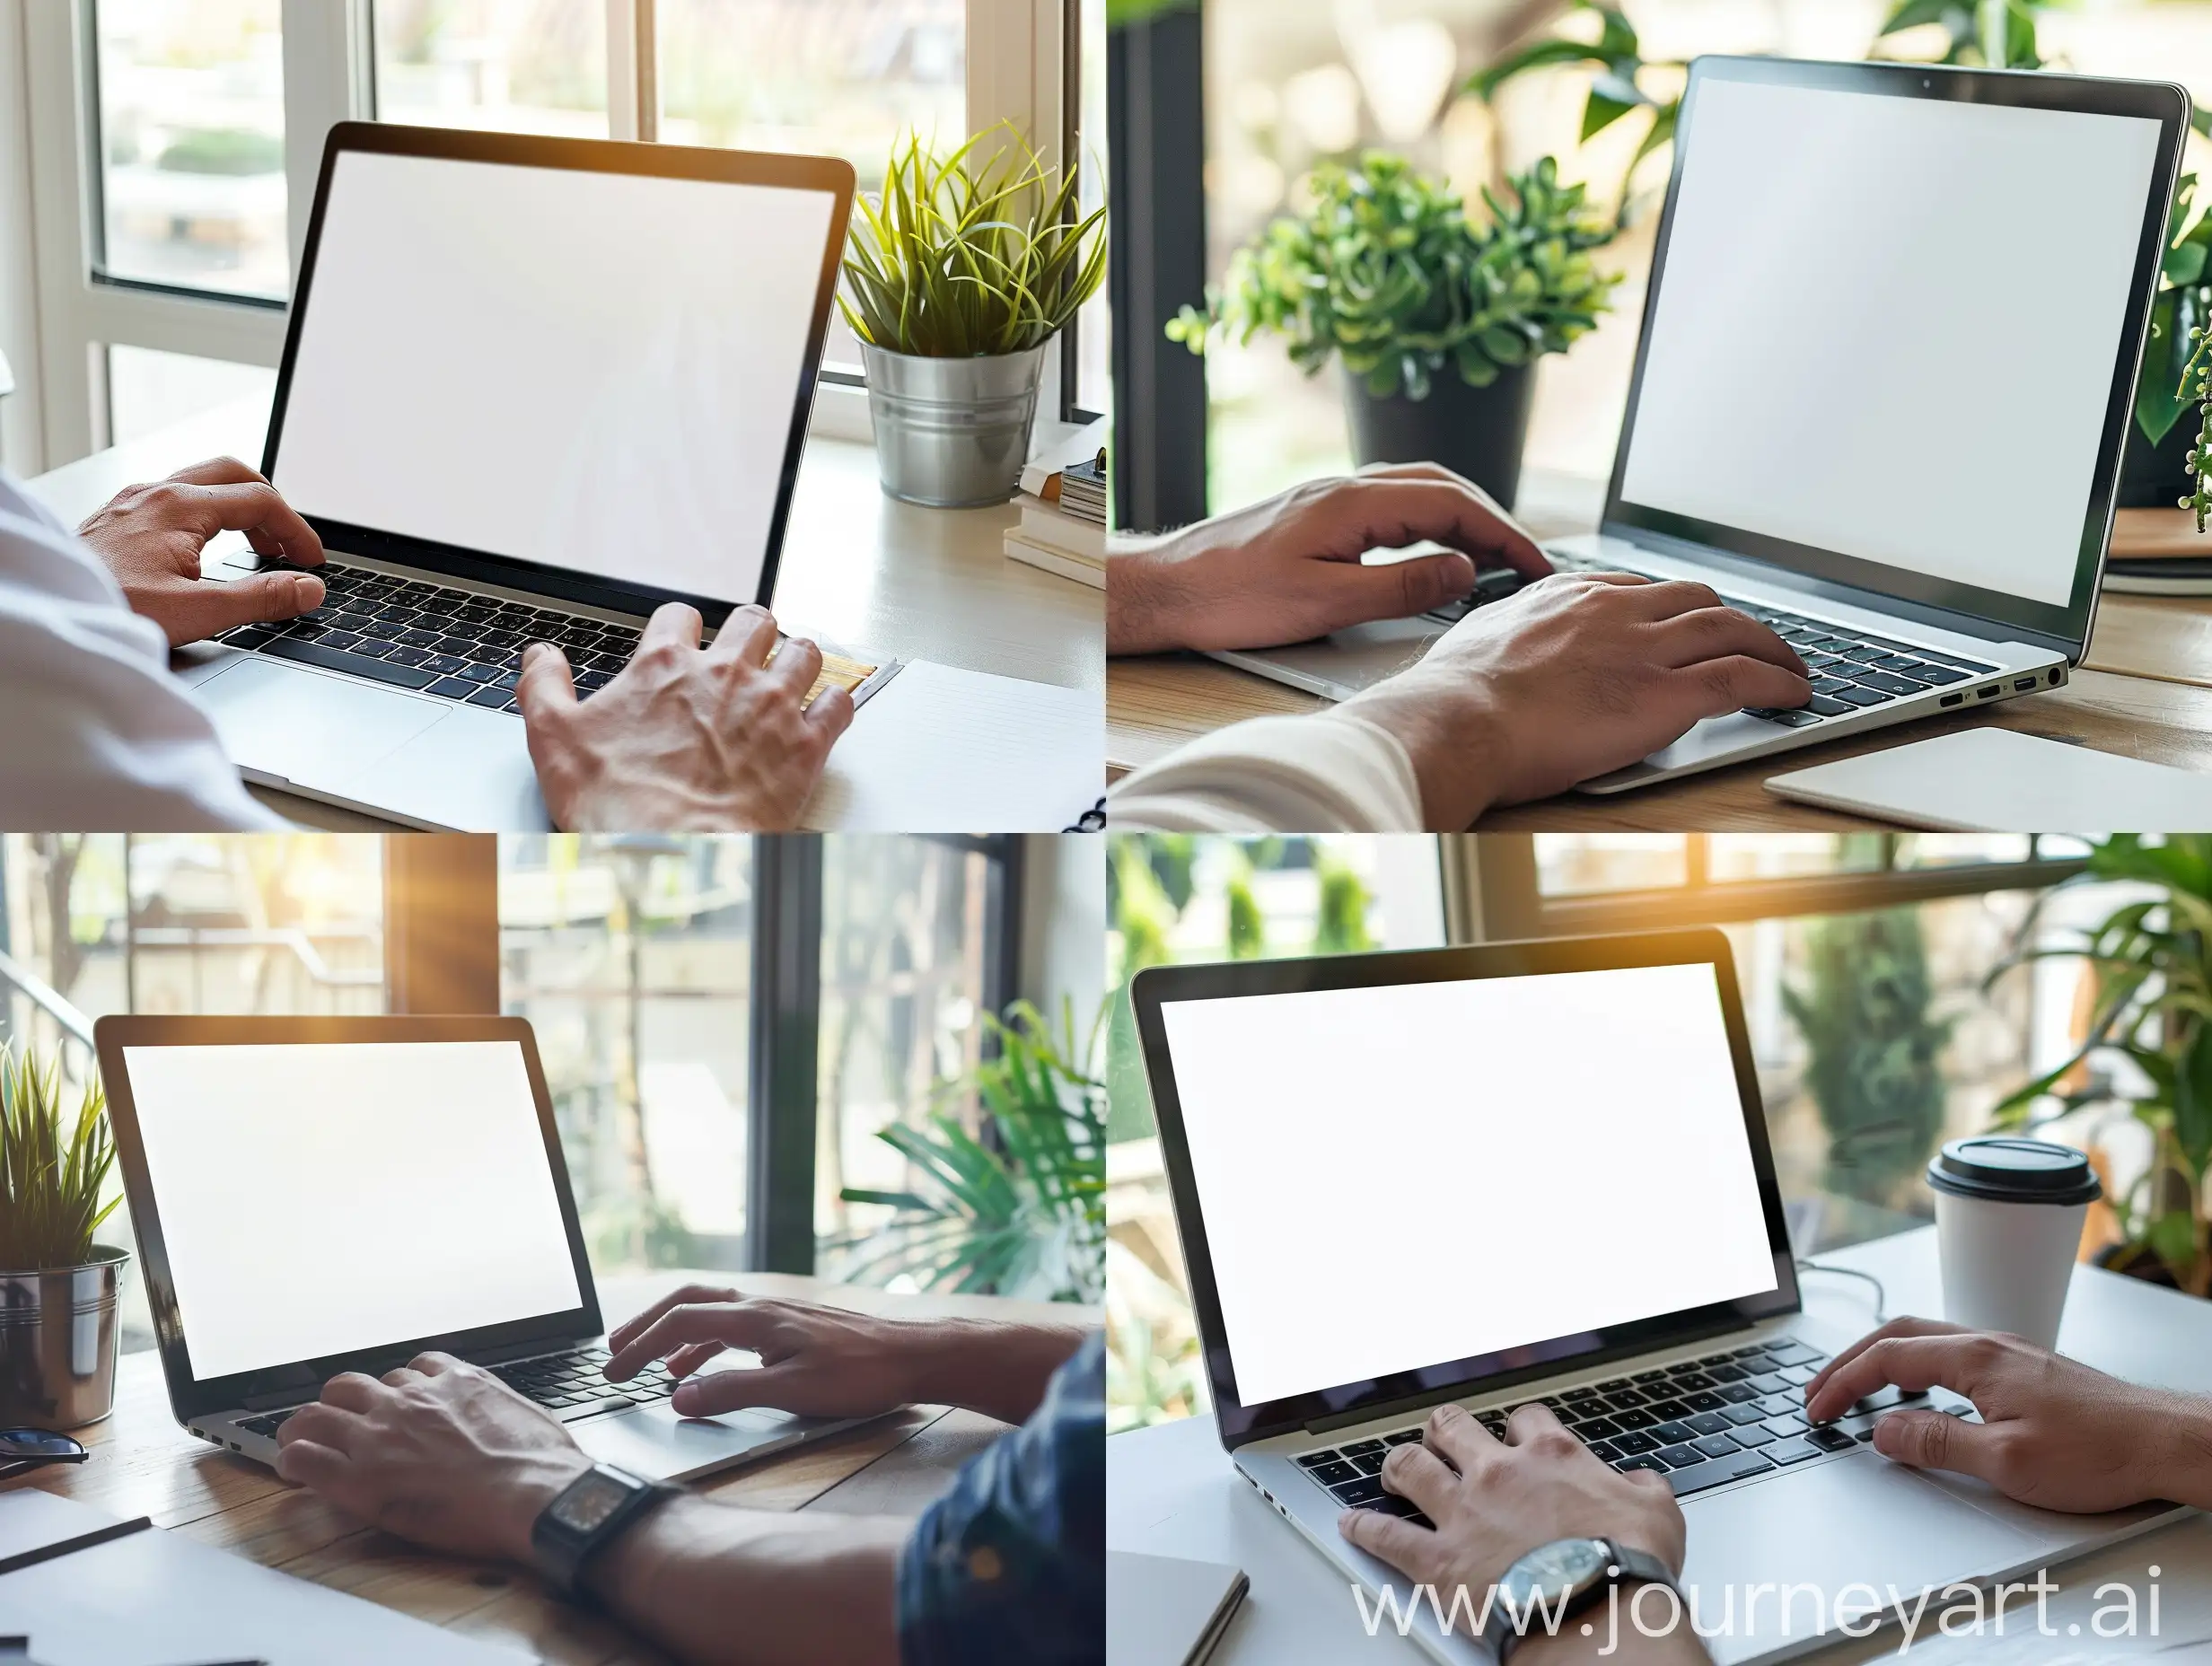 Man's hands using laptop with blank screen on desk in home interior